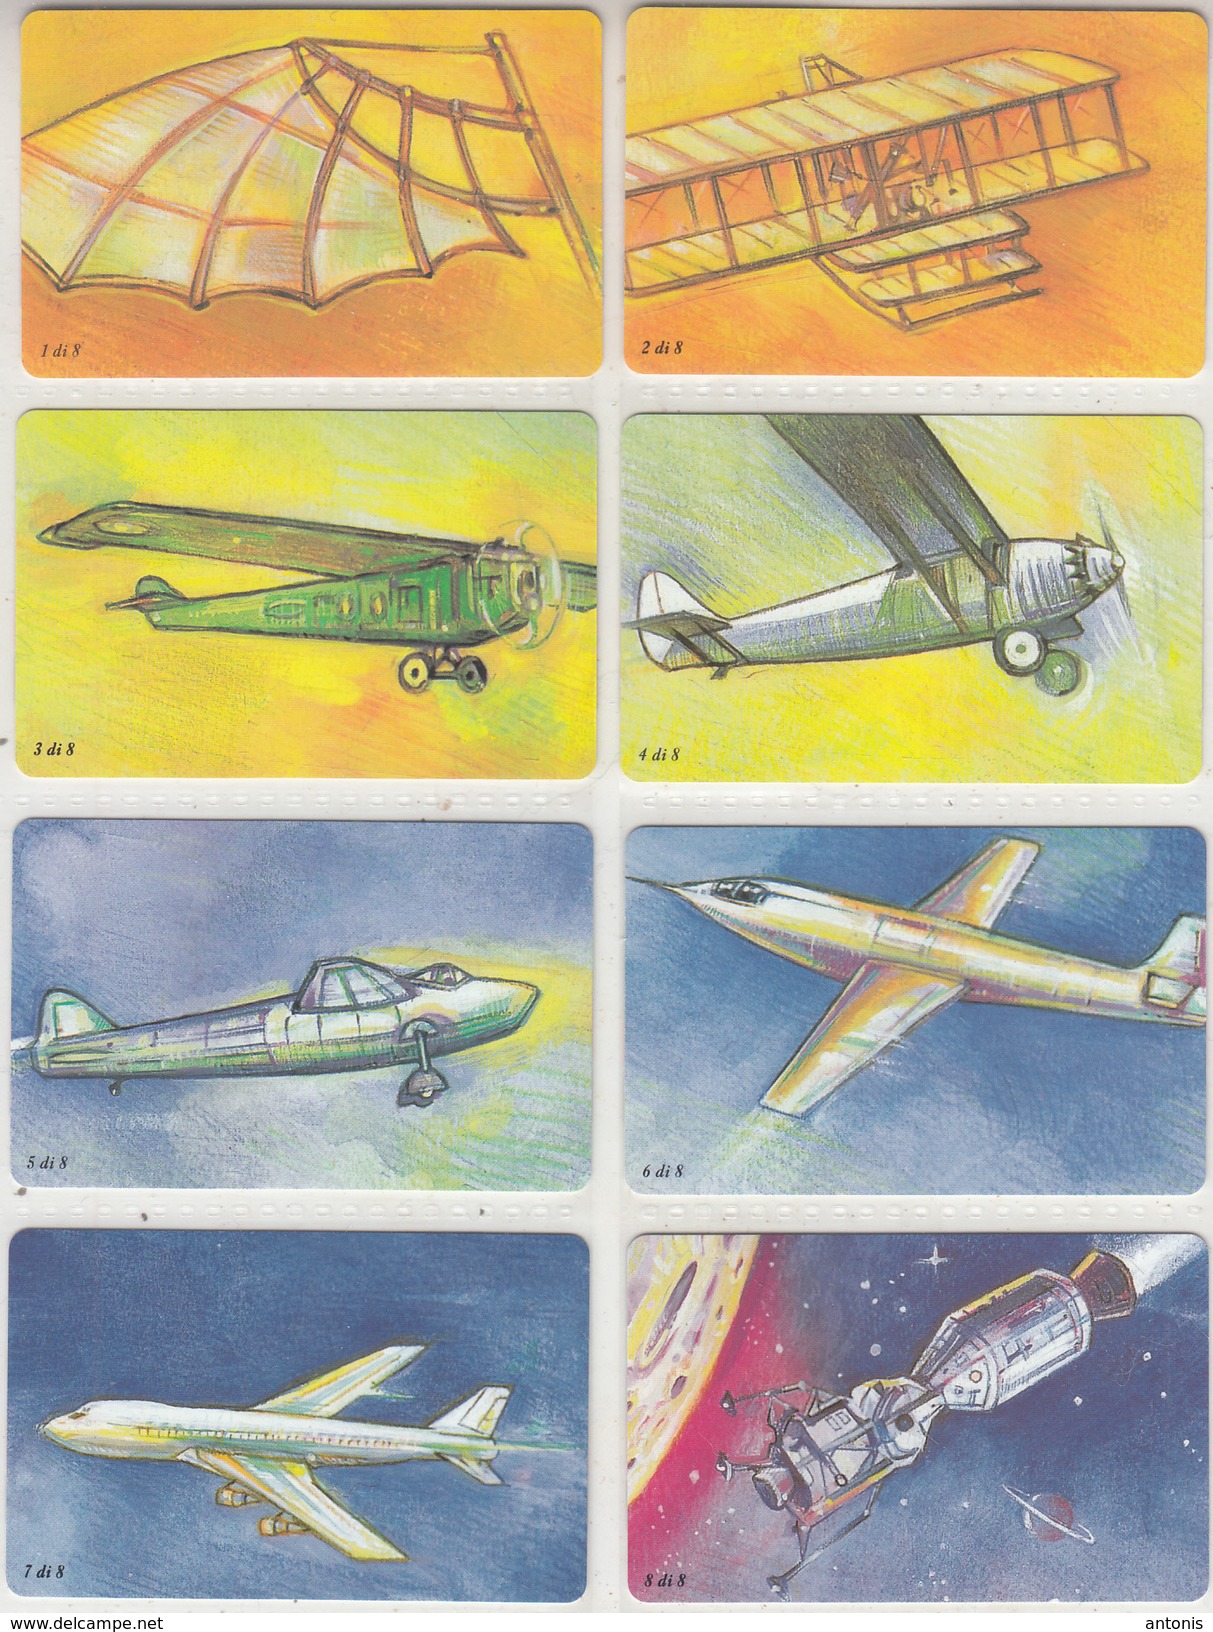 ITALY - Set Of 8 Cards, From The Wings To The Moon, Visual Flight Achievements, Tirage 90000, Exp.date 30/06/00, Mint - Öff. Werbe-TK